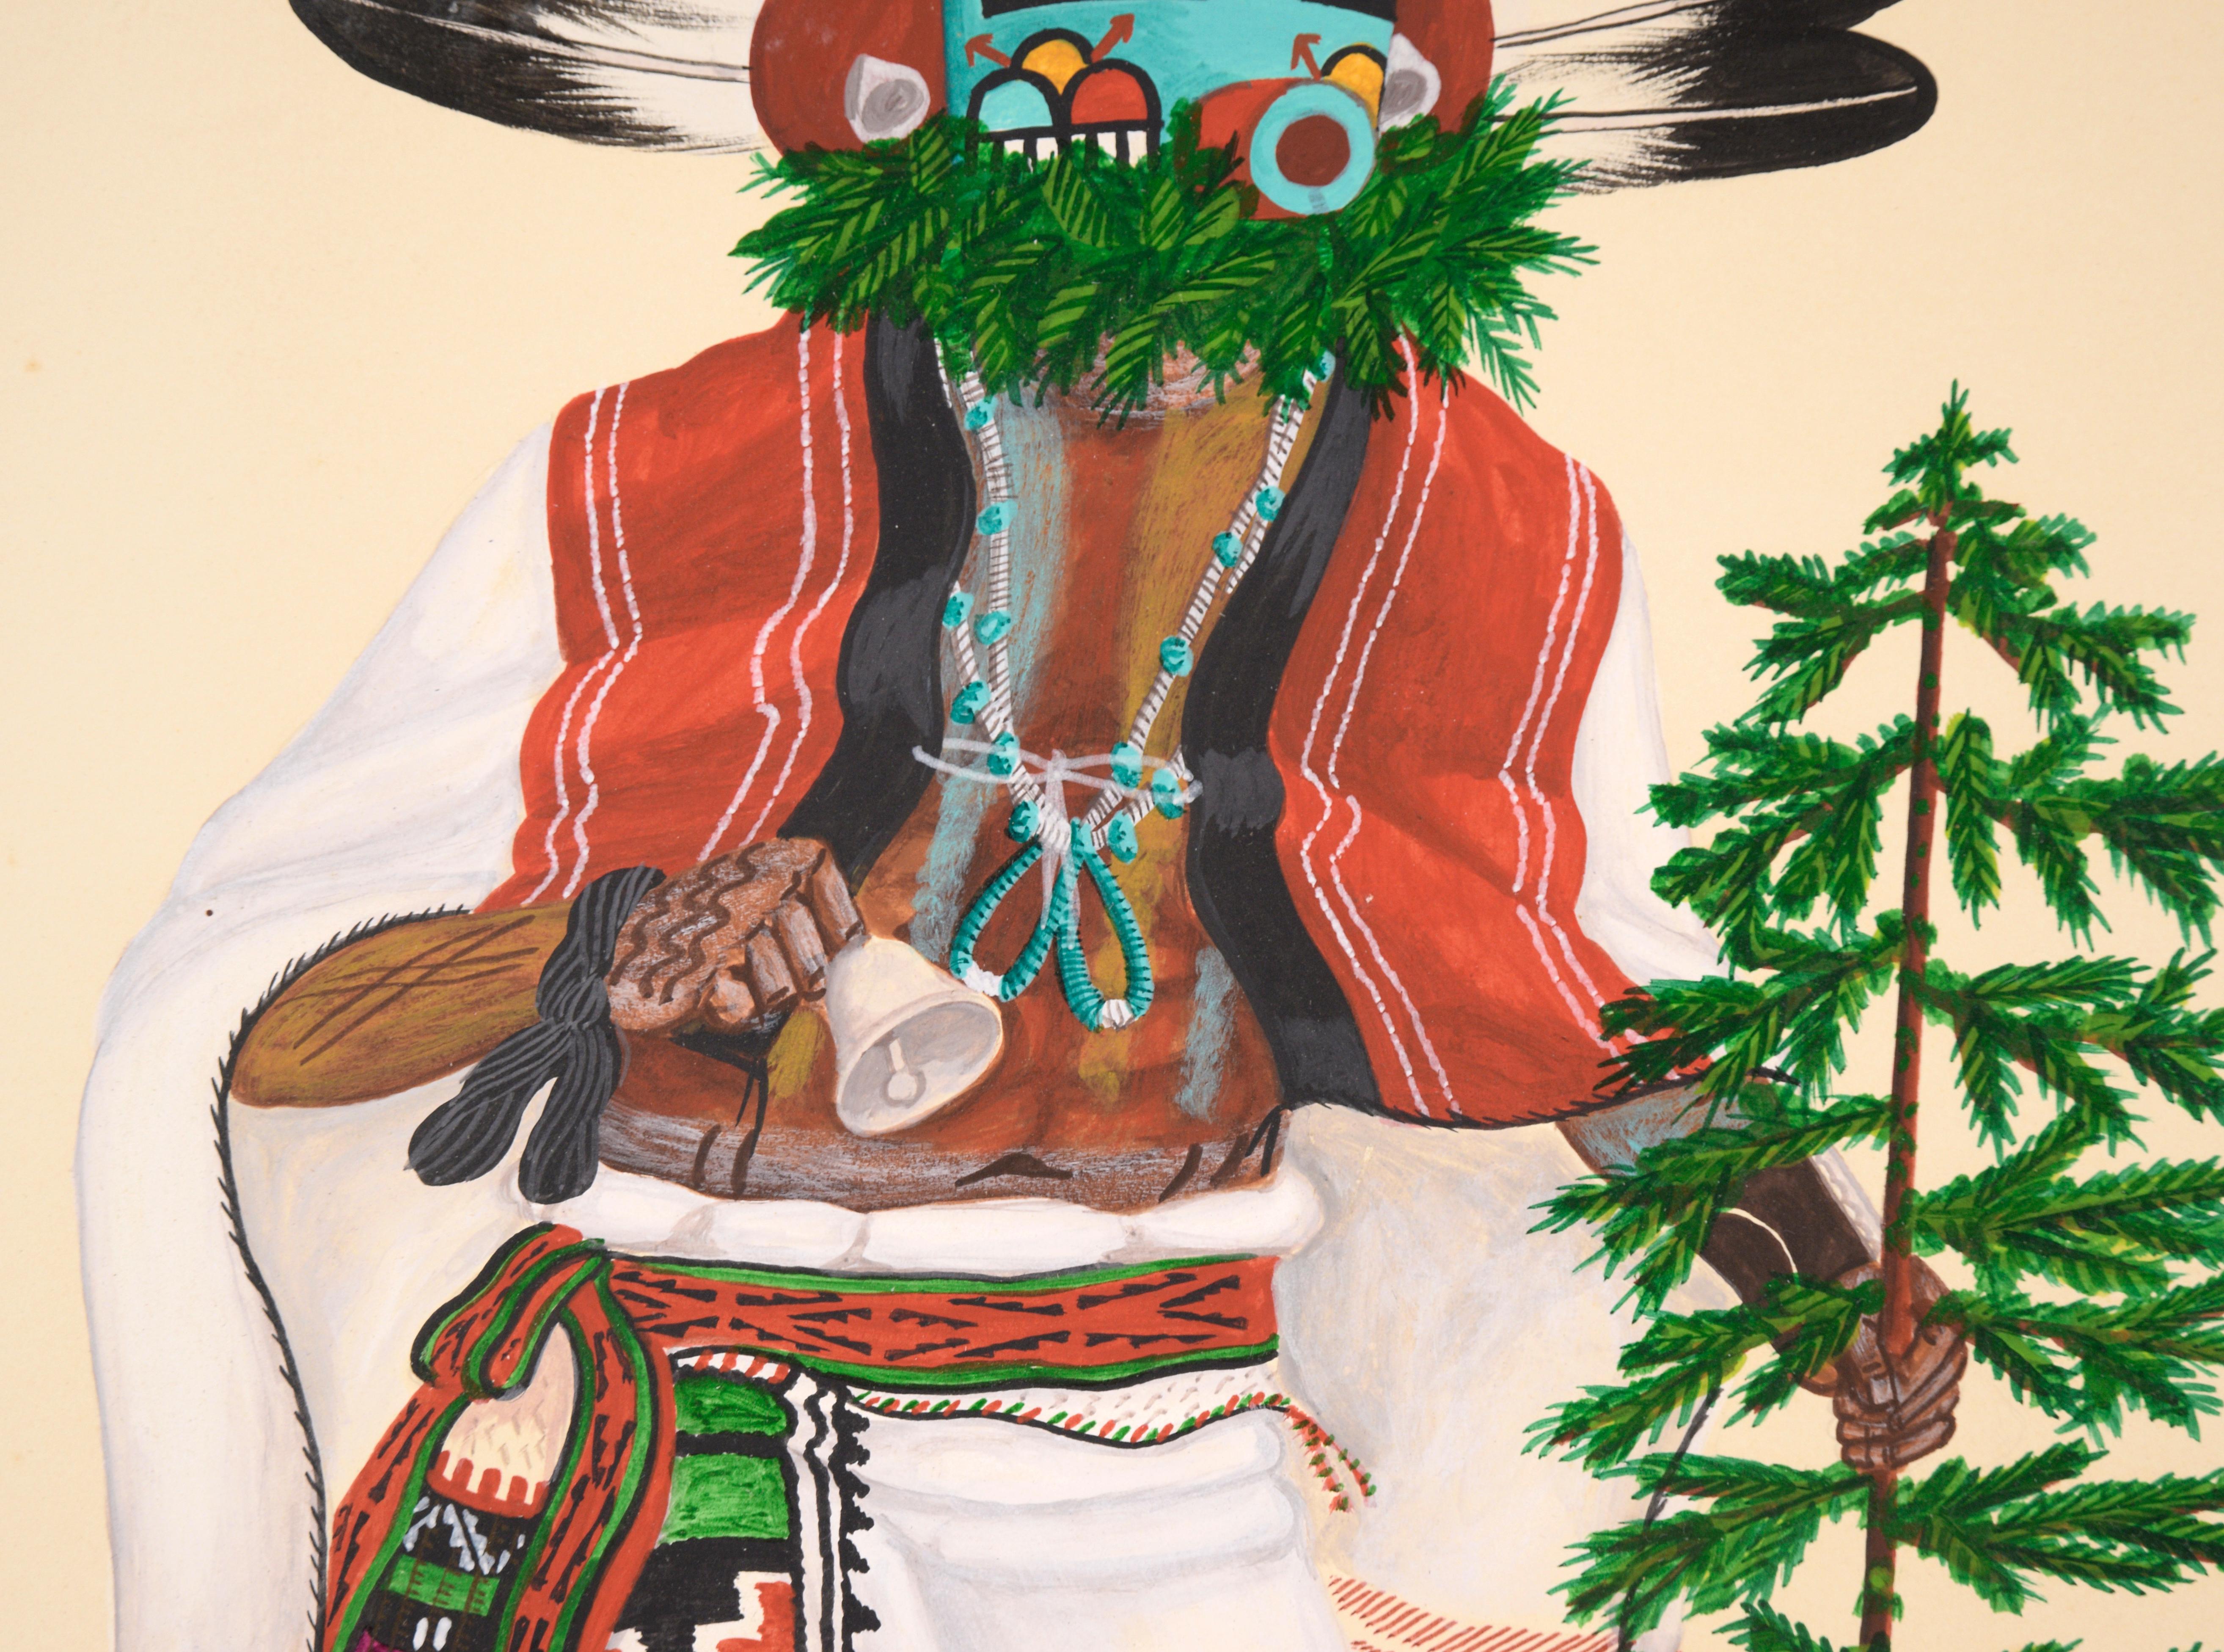 Detailed and vibrant depiction of a kachina dancer by Cliff Bahnimptewa (Native American, 1937-1984). Signed and dated in the lower right corner. Presented in a new black mat with foamcore backing. Postcard size: 20